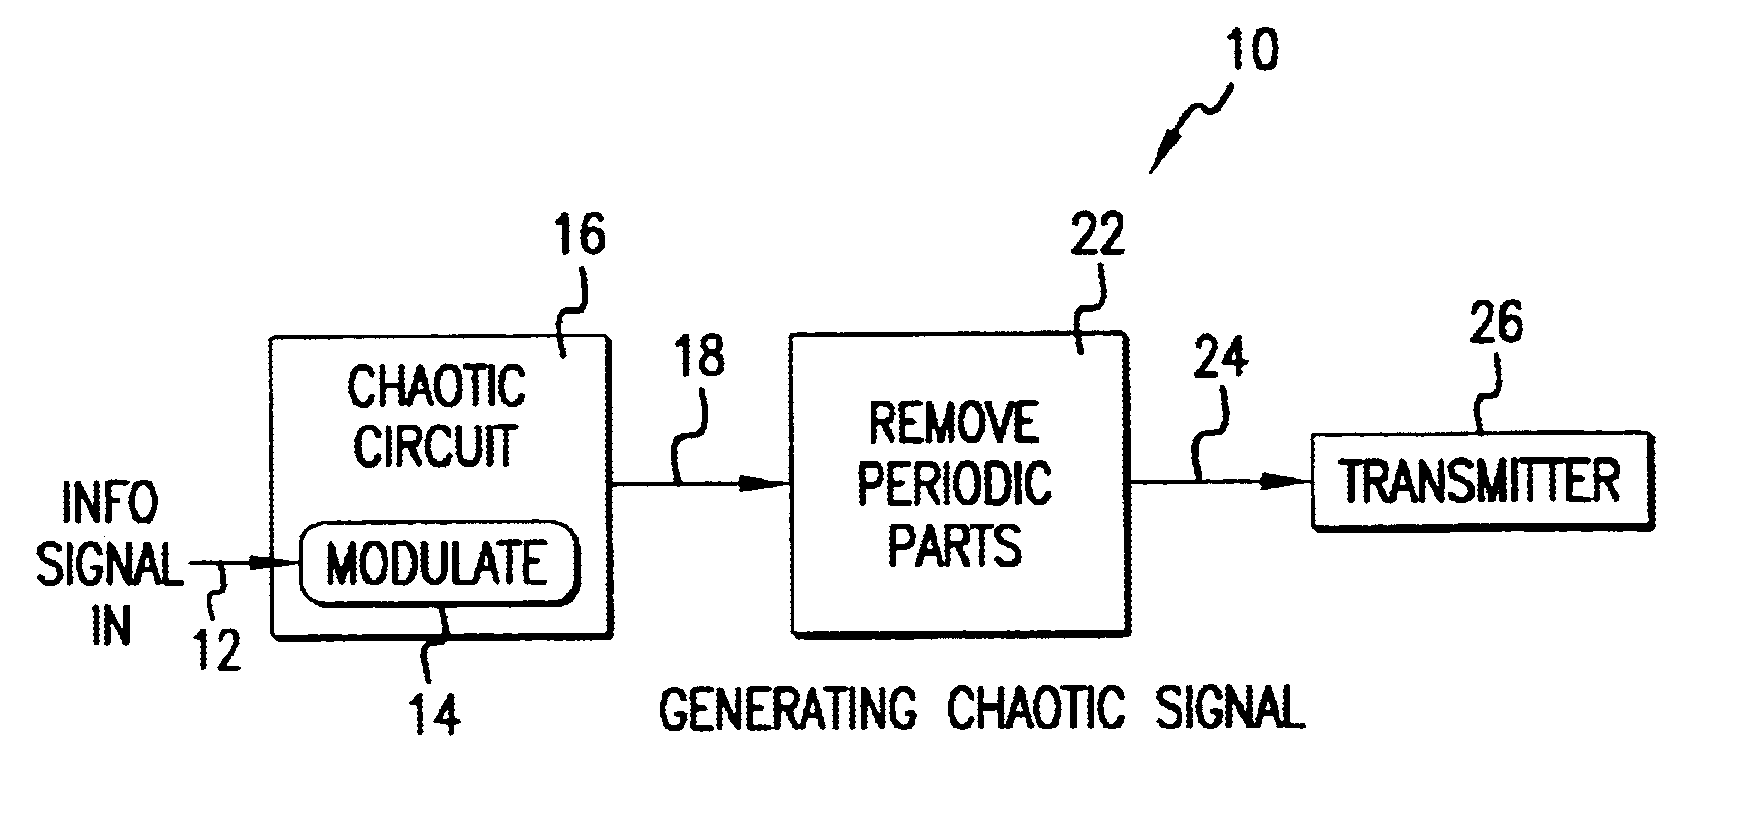 Low-interference communications device using chaotic signals